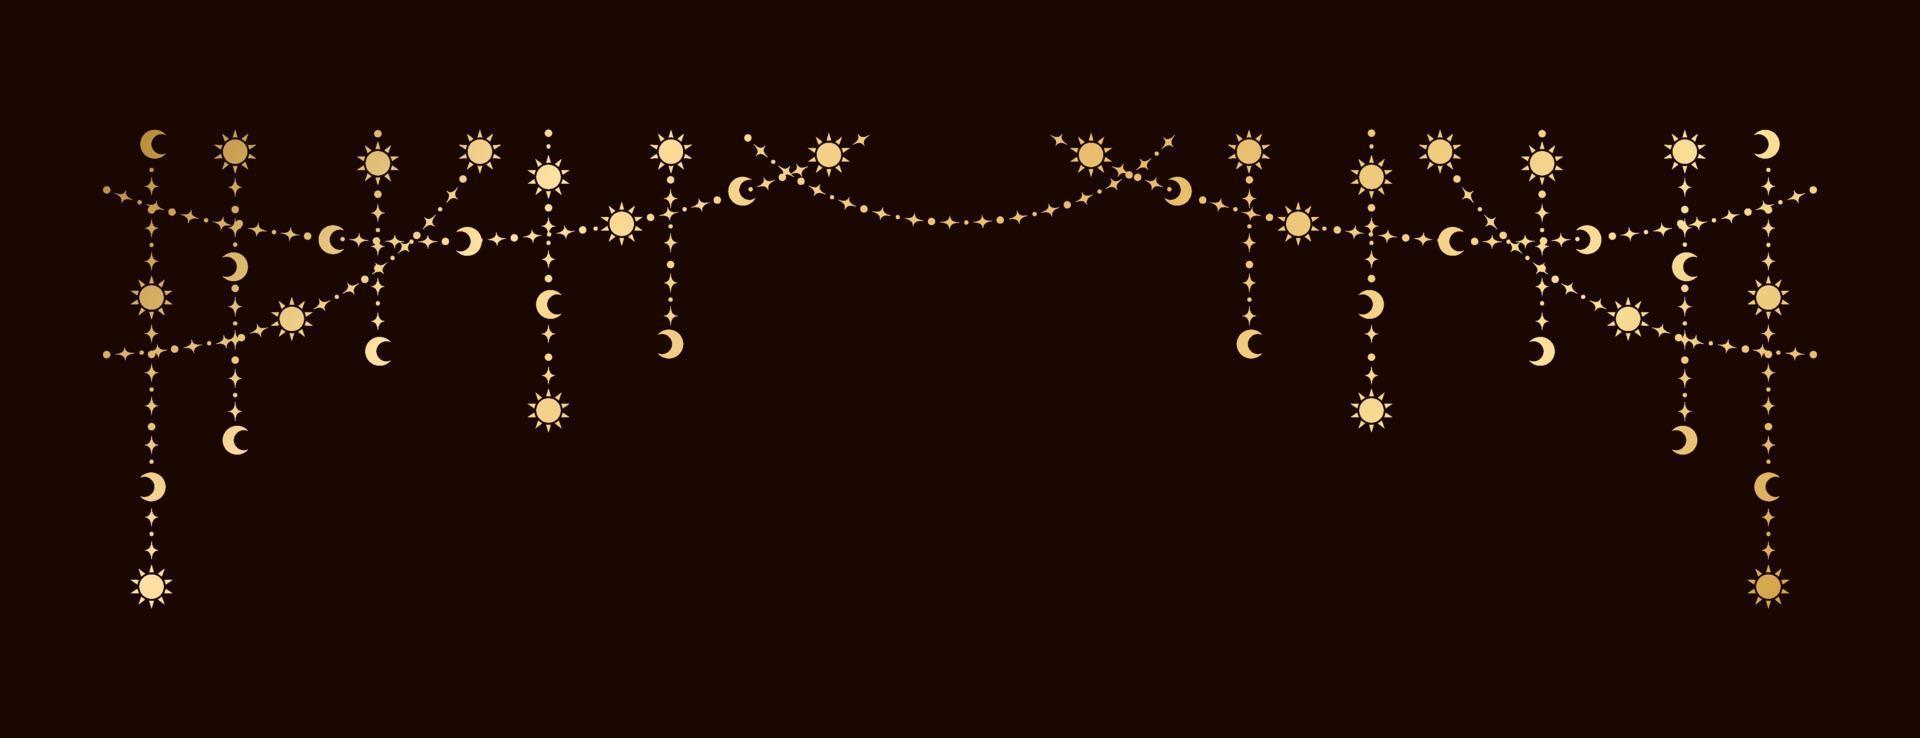 Gold mystic celestial hanging garland with sun, stars, moon phases, crescents. Ornate bohemian magical curtain decorative element vector